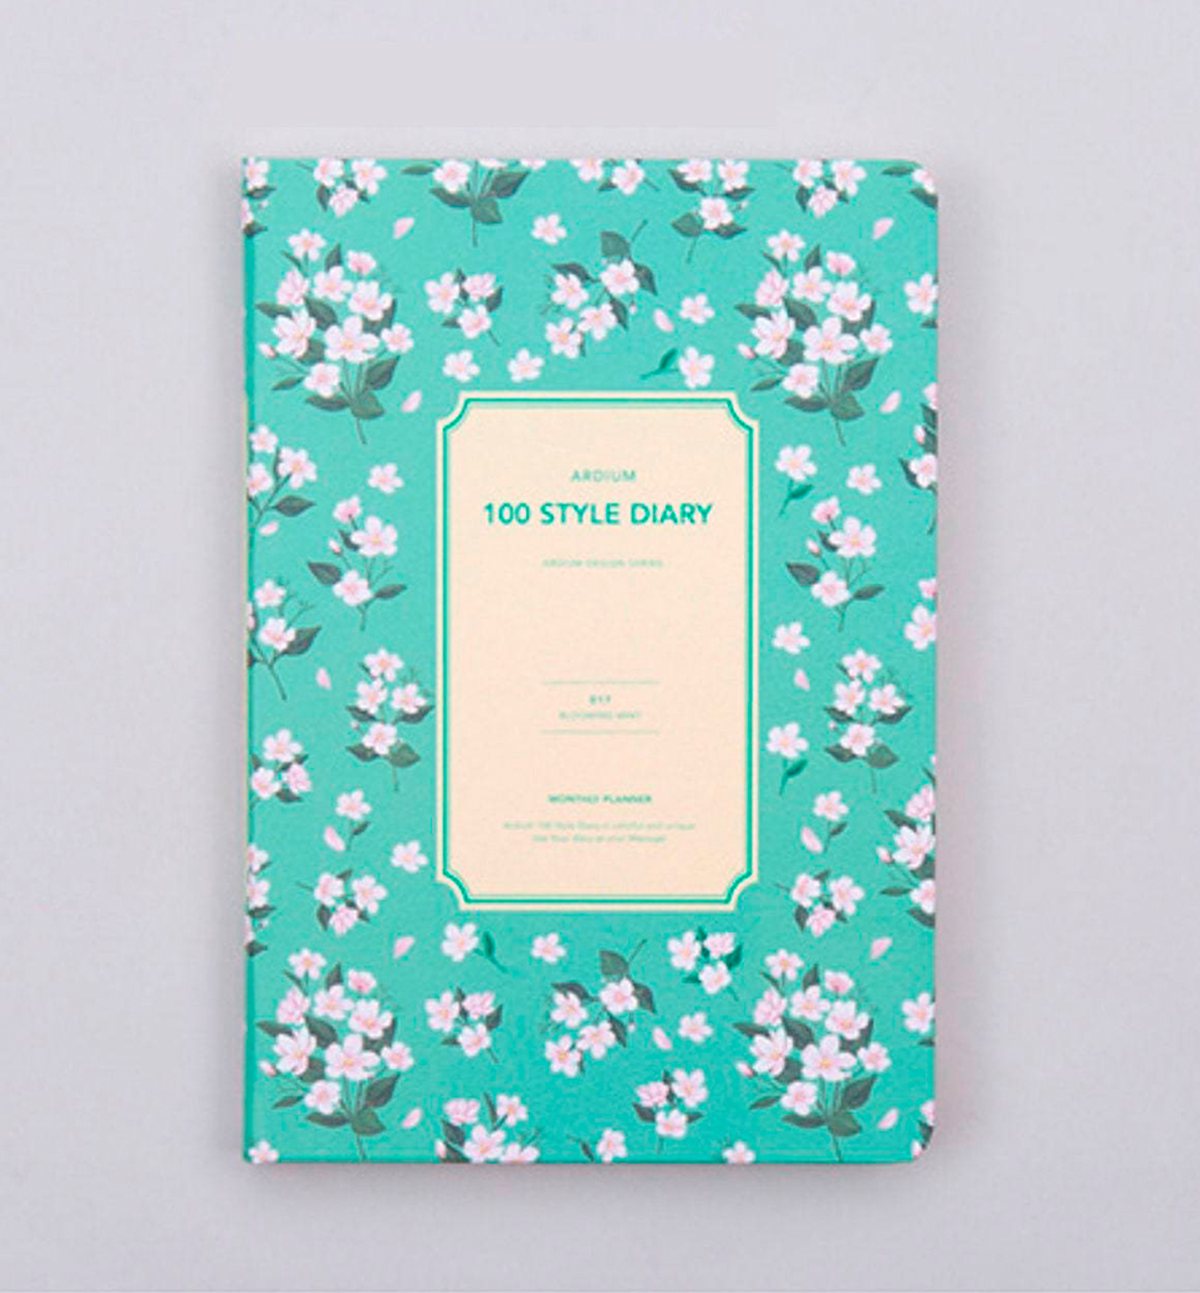 100 Style Diary [Blooming Mint]